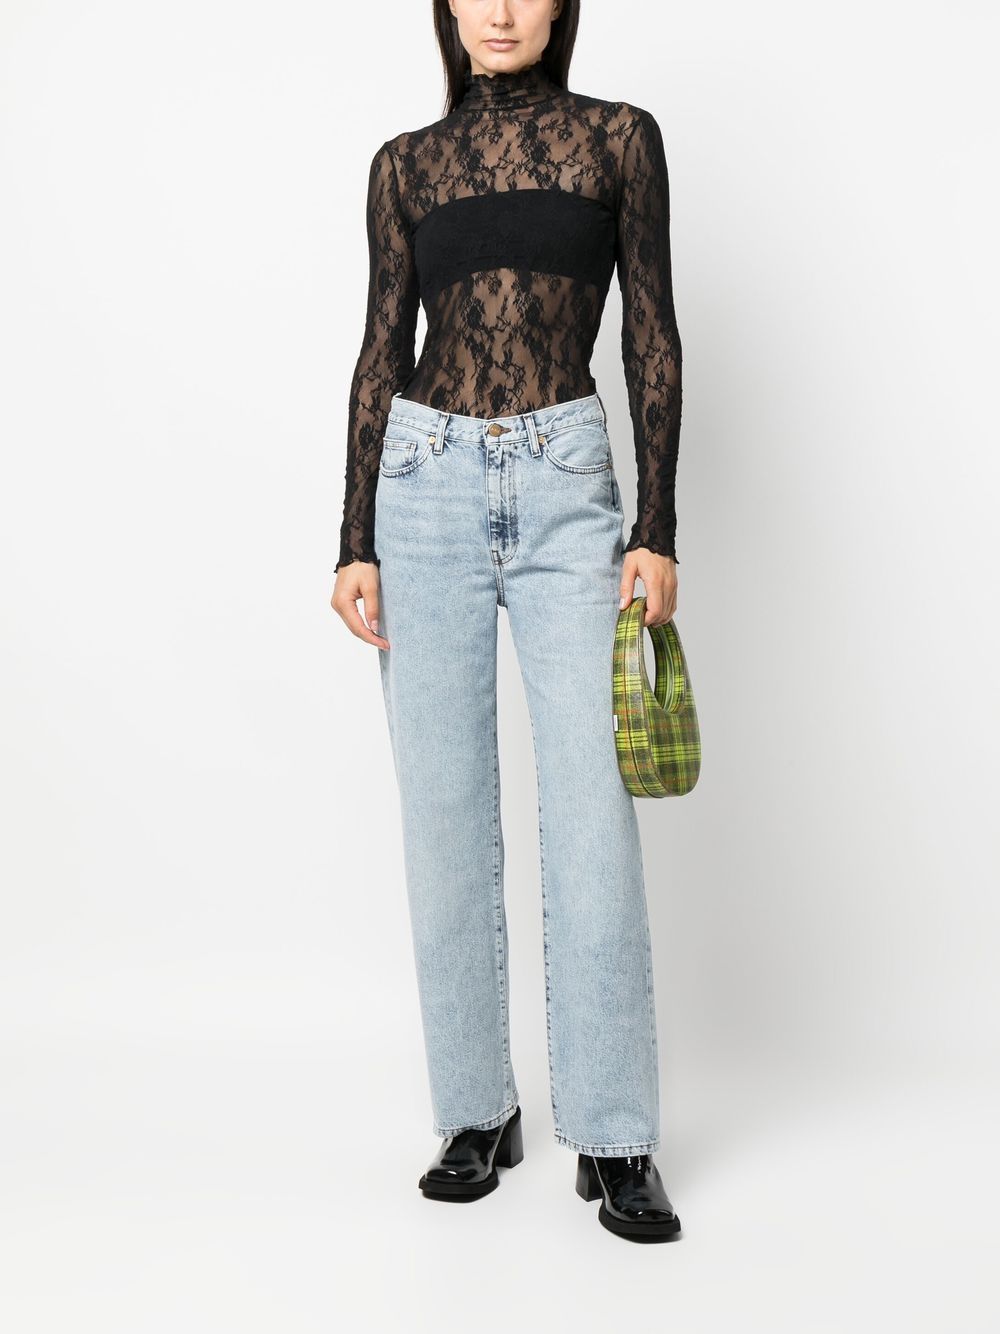 Wolford Floral Lace Mock Neck Long Sleeve Top in Black